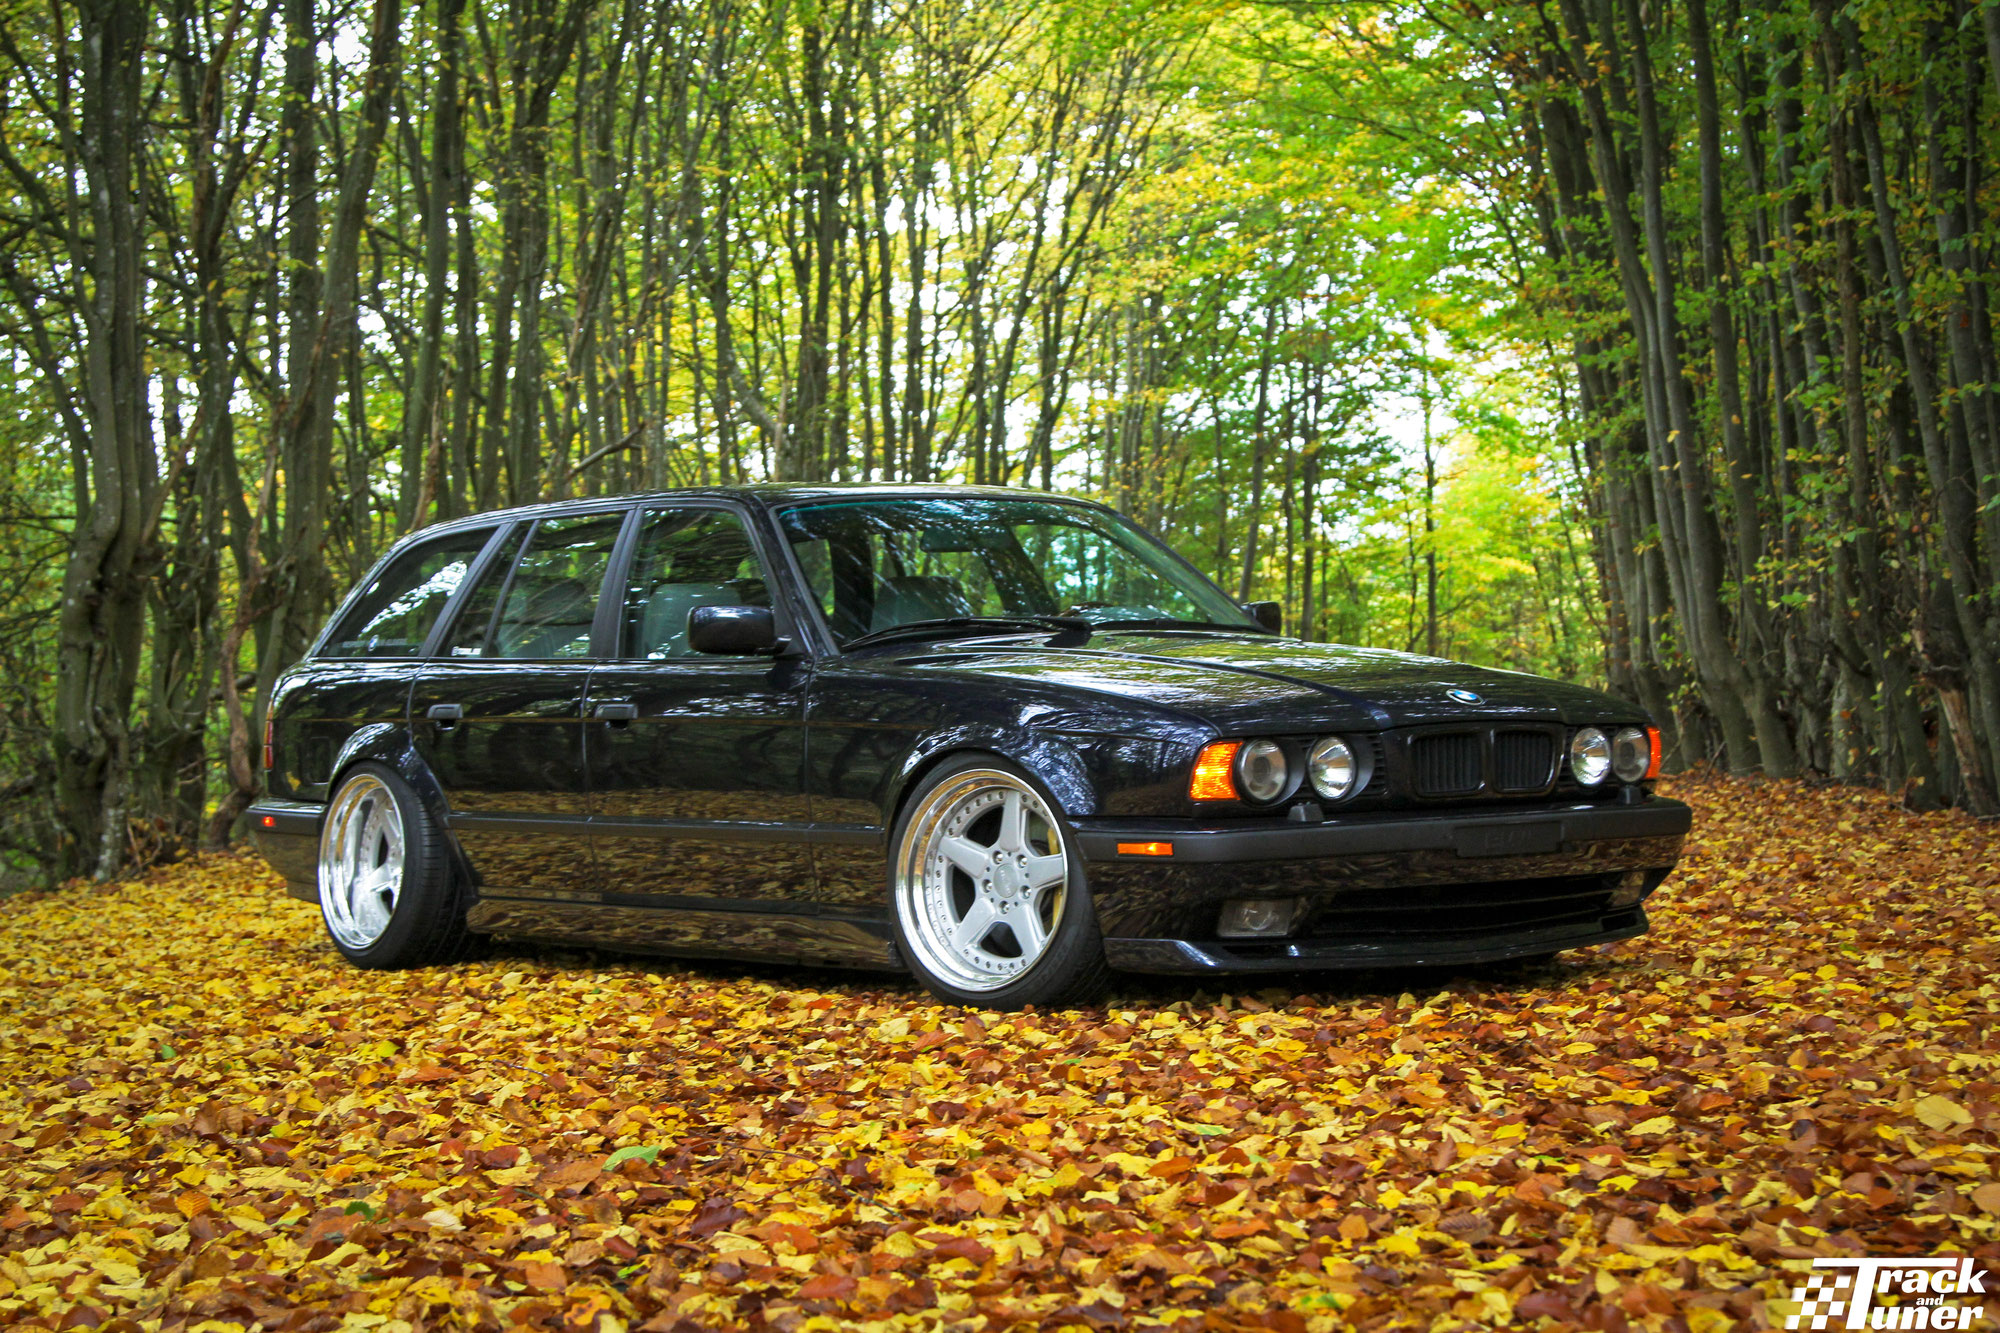 WeDrive: Taking our brand new BMW e34 Touring to the Nordschleife